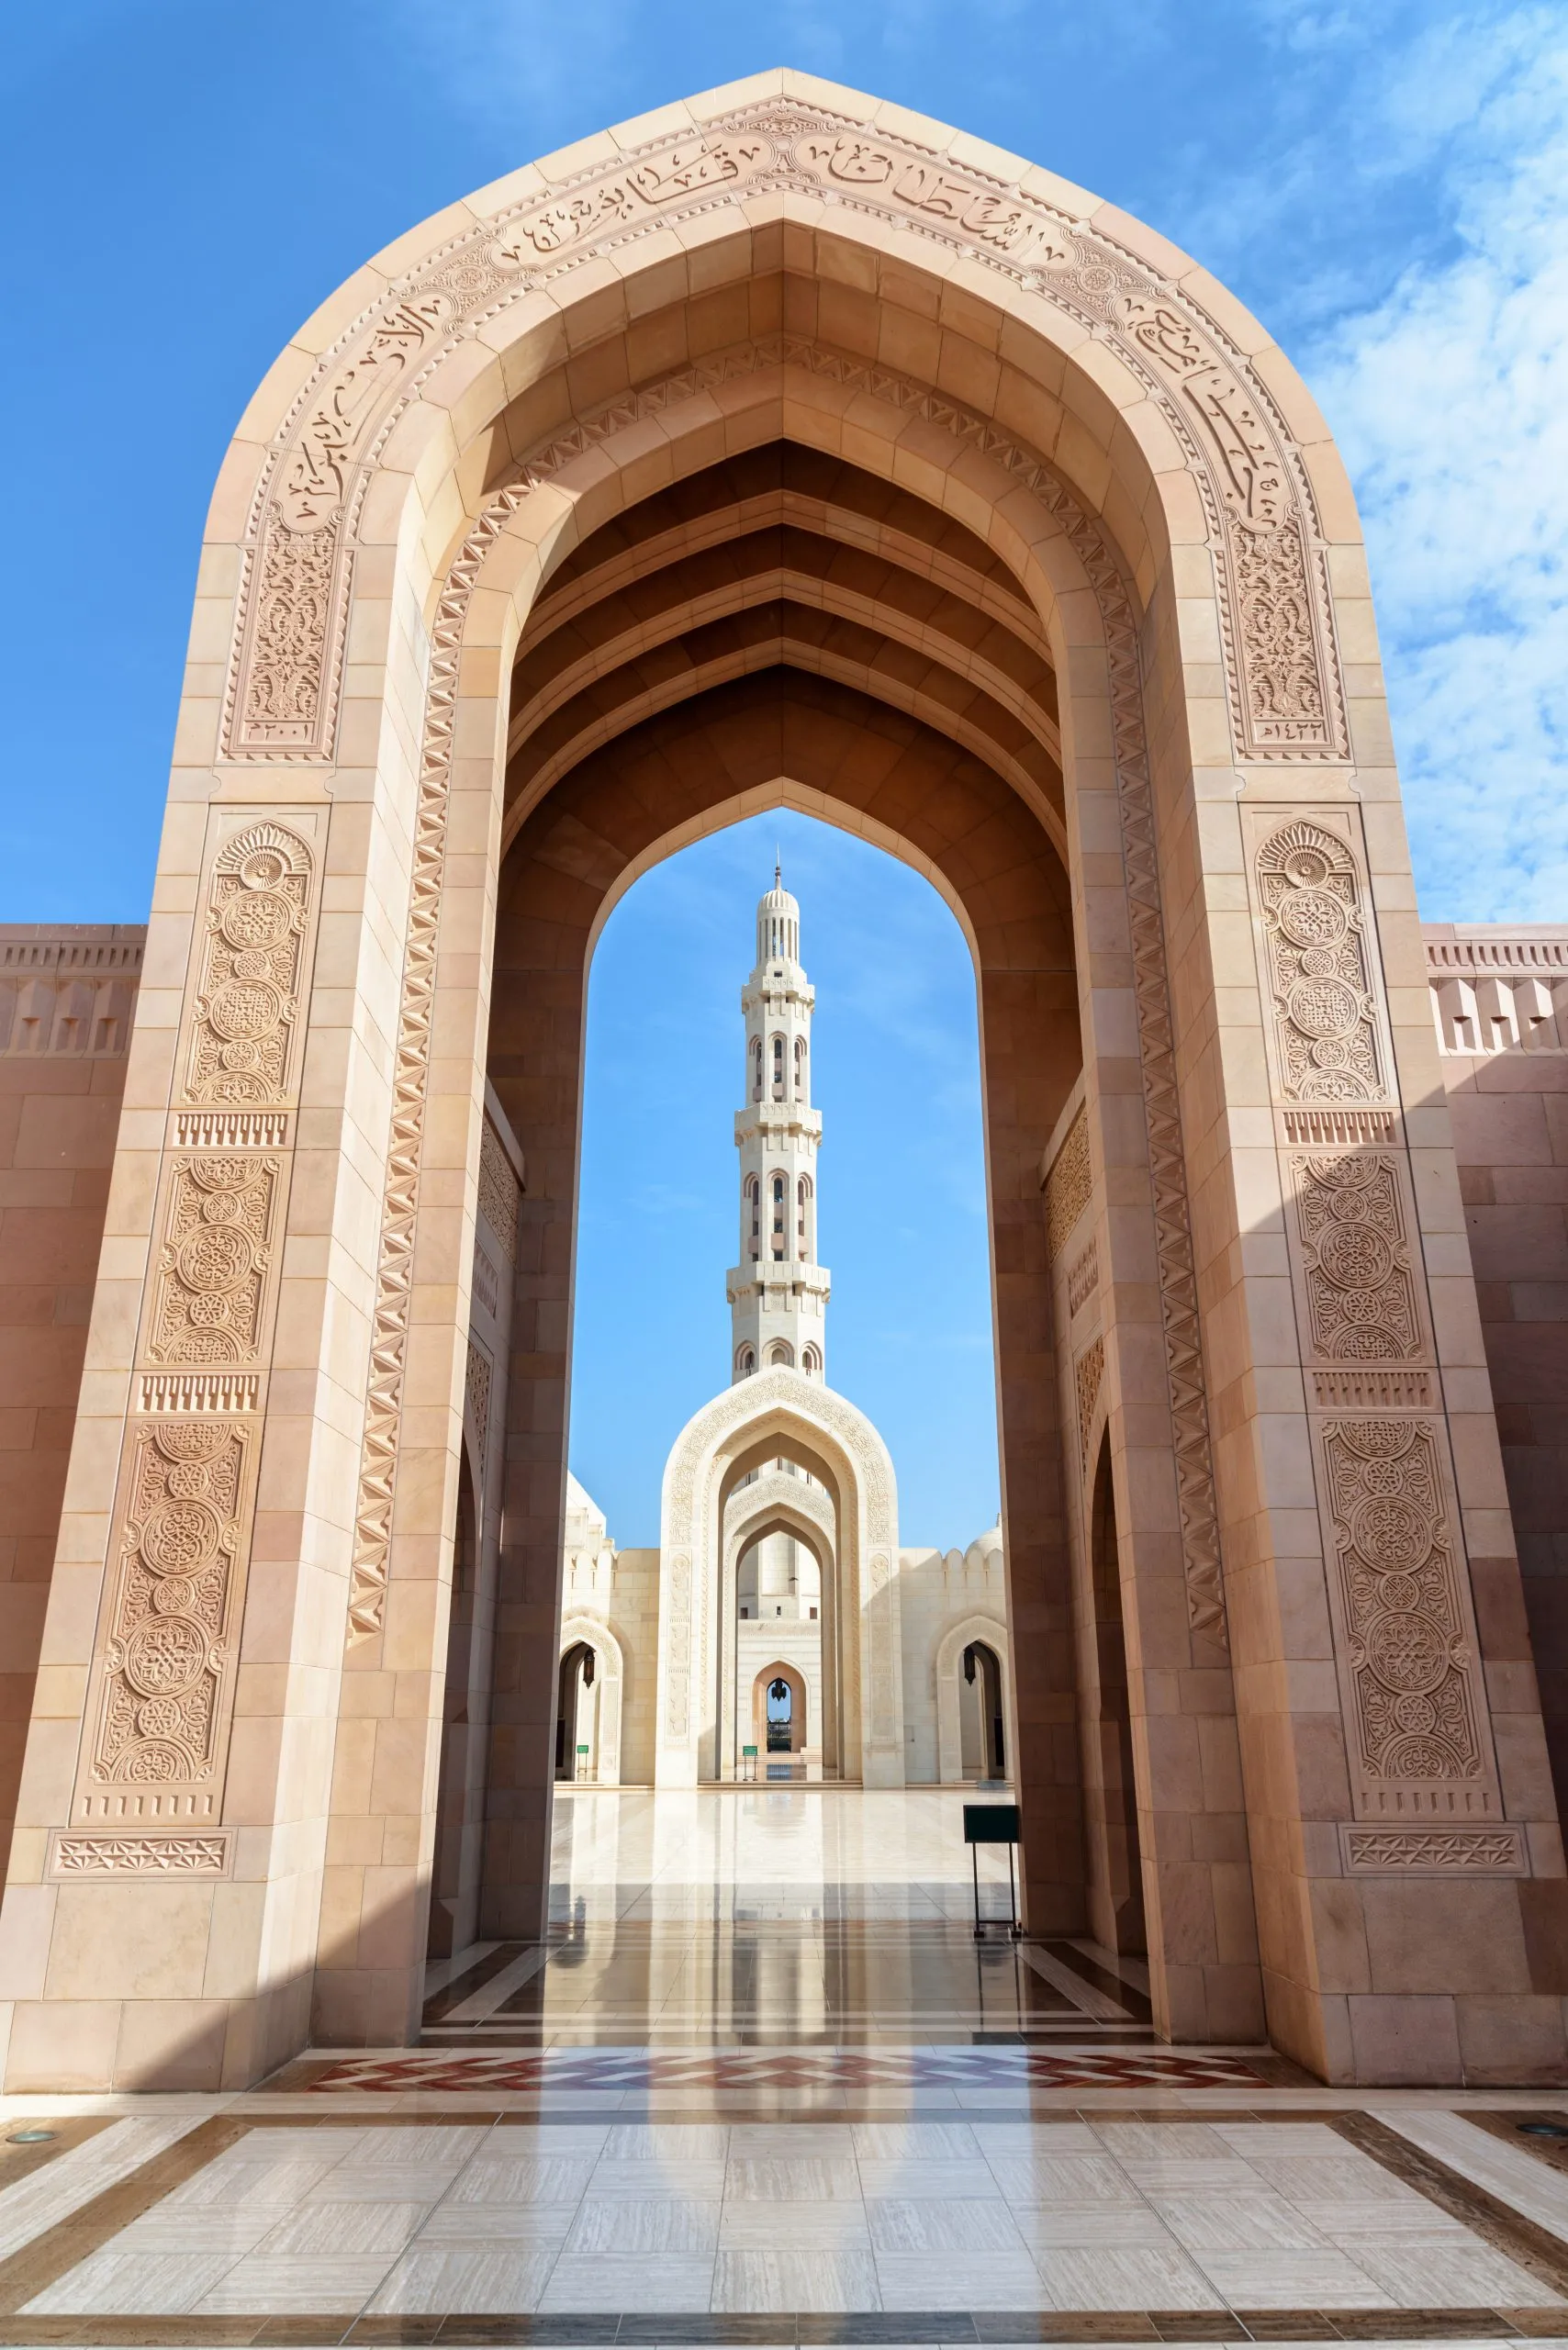 Scenic arches in courtyard of the Sultan Qaboos Grand Mosque